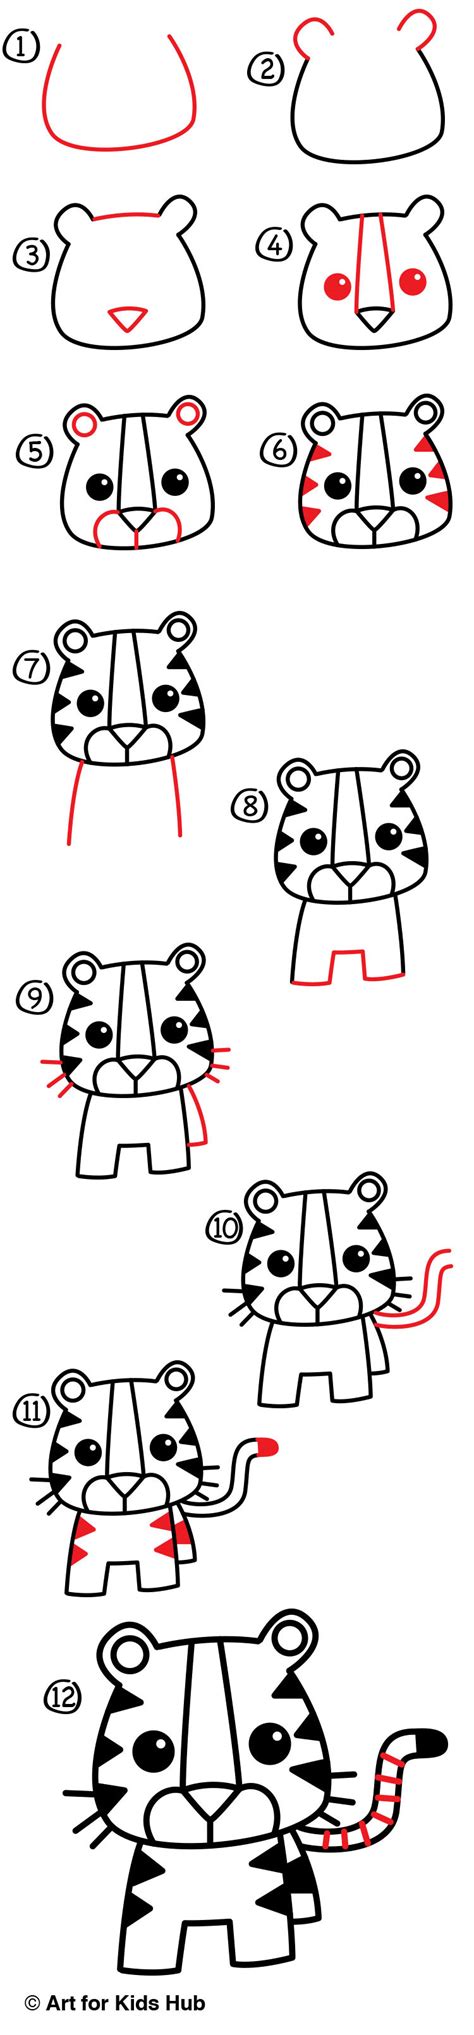 Art Hub How To Draw A Tiger Either Draw It Freehand While Looking At